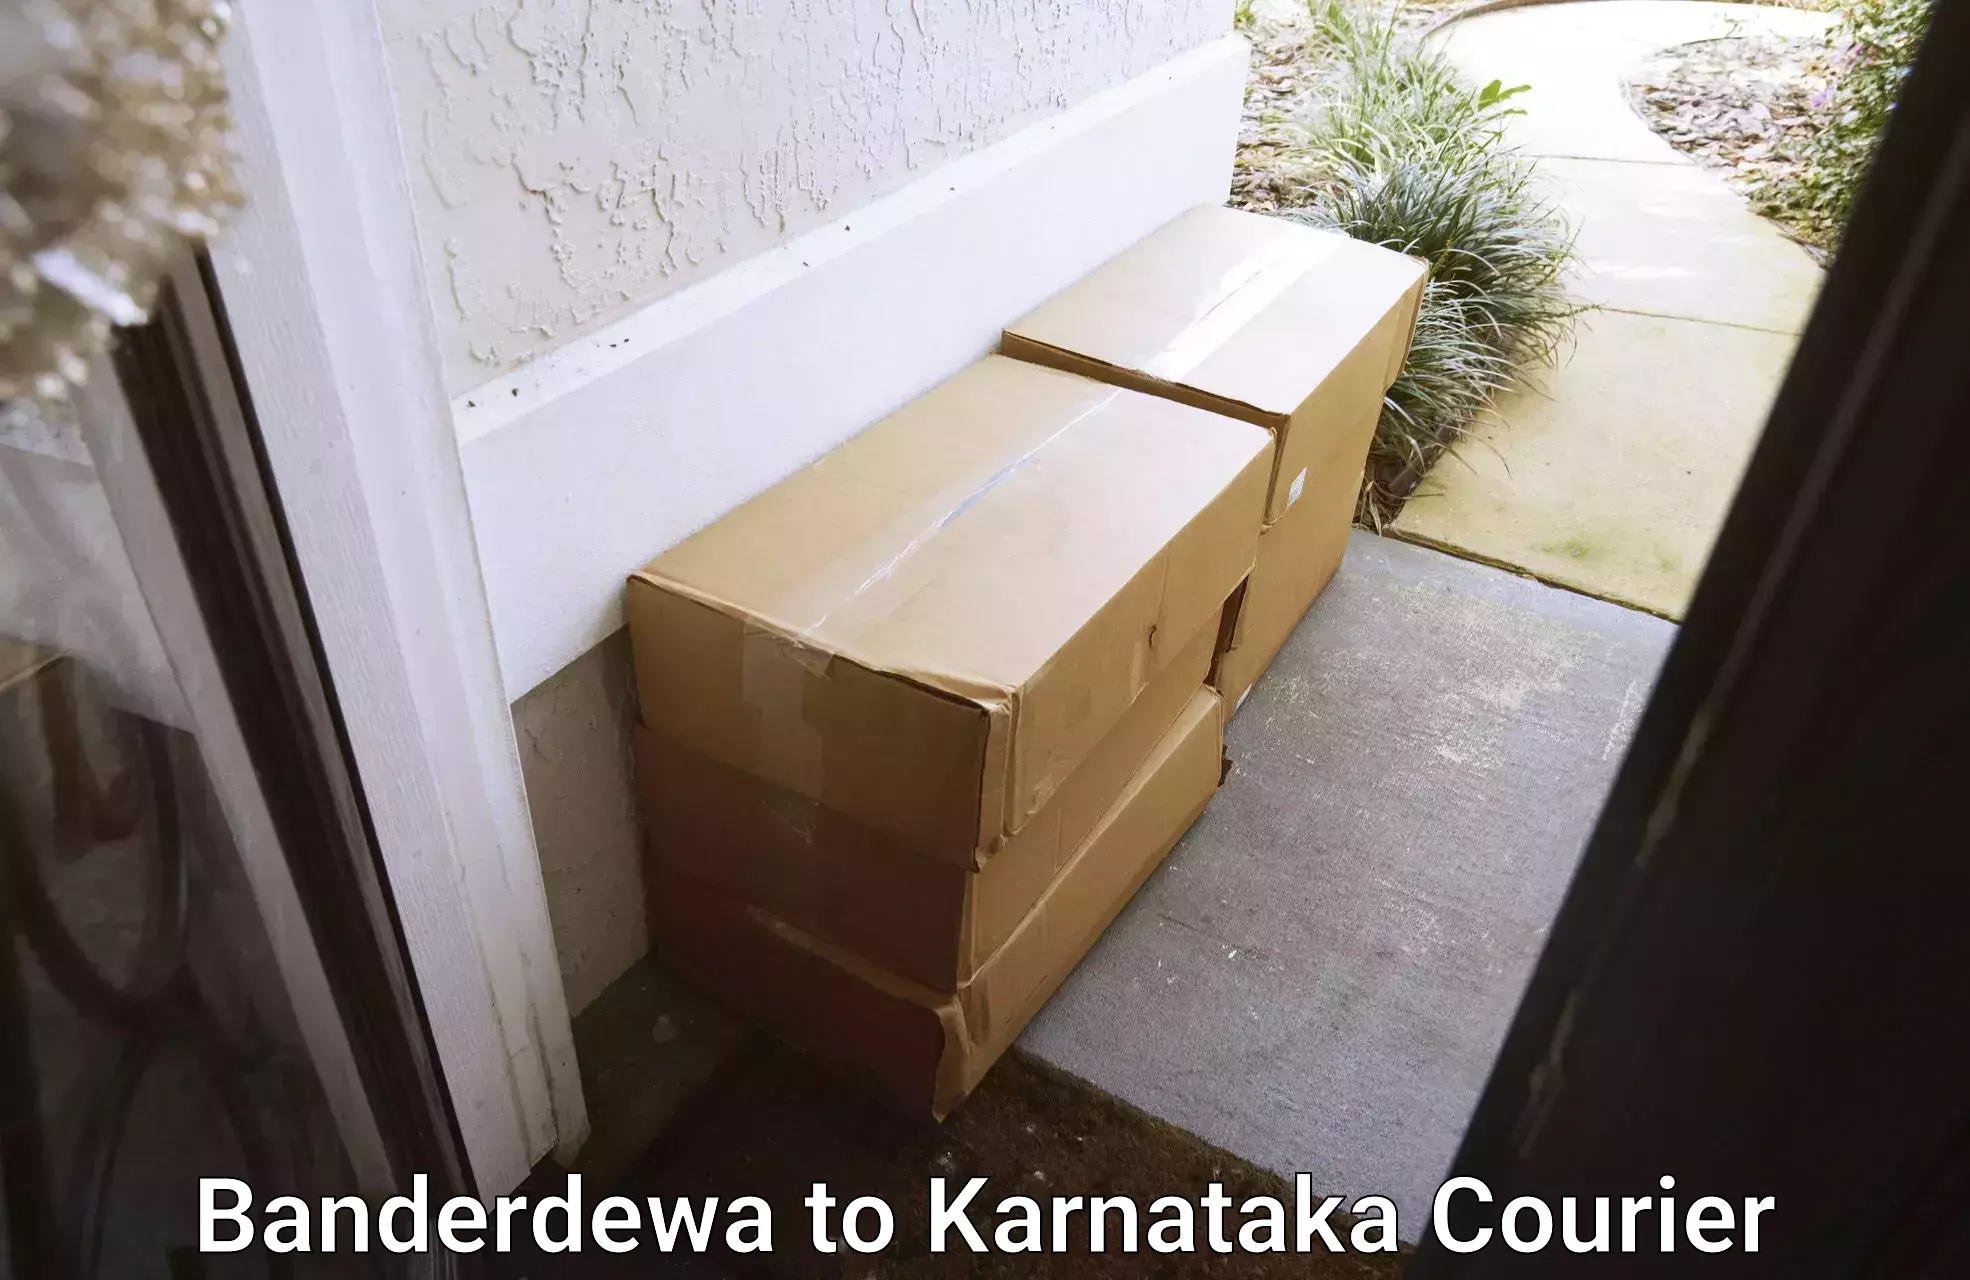 Same-day delivery solutions Banderdewa to Bangalore